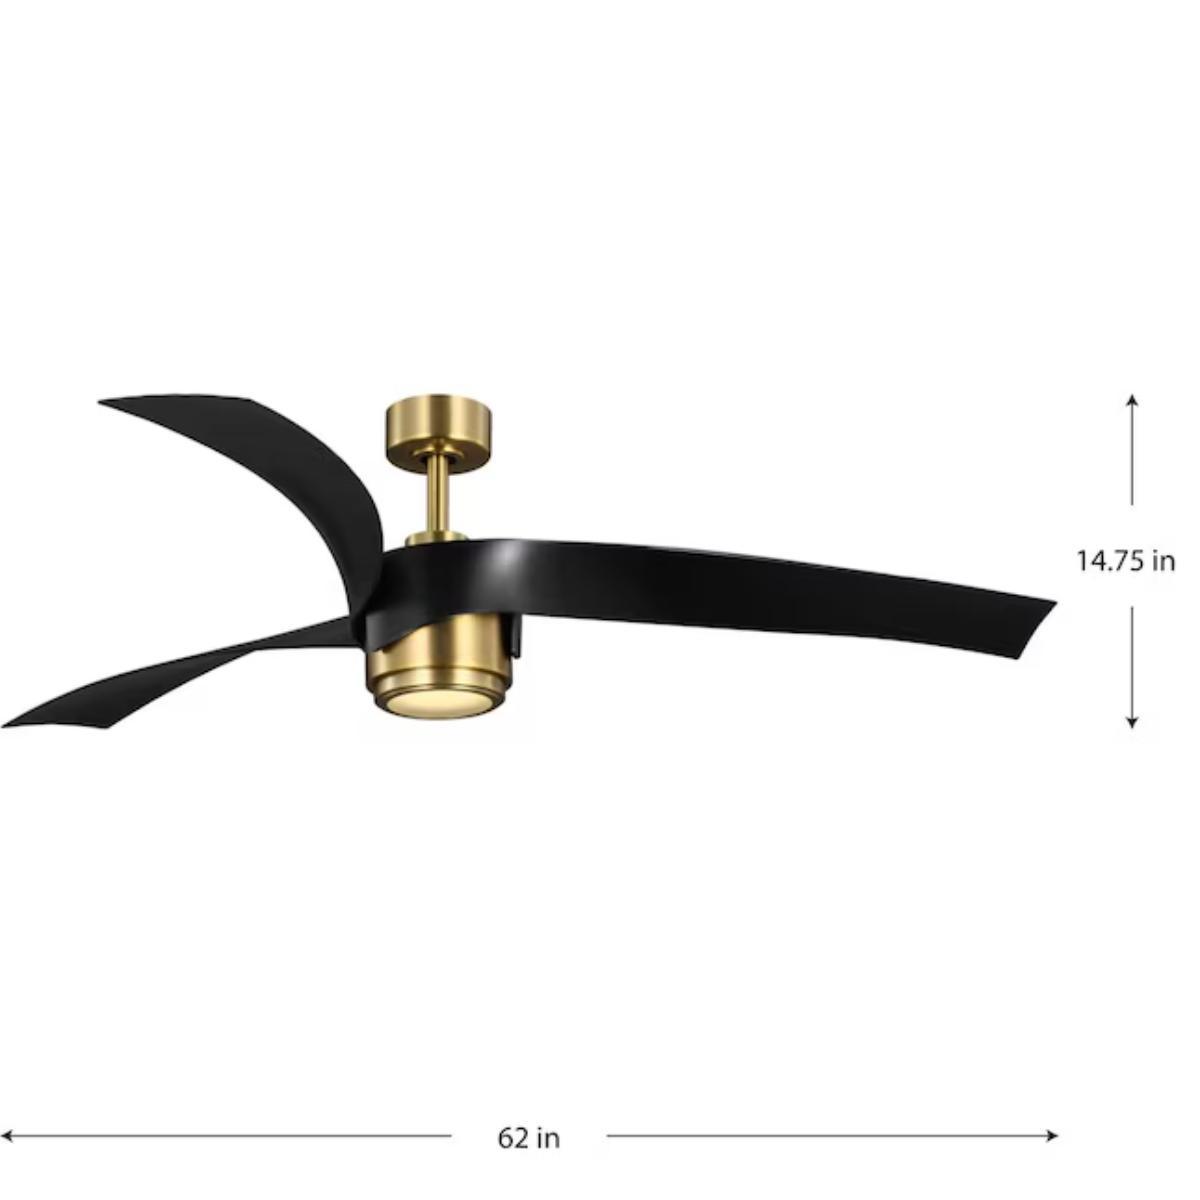 Insigna 60 Inch LED Ceiling Fan with Light Kit and Remote, Vintage Brass with Matte Black Blades - Bees Lighting